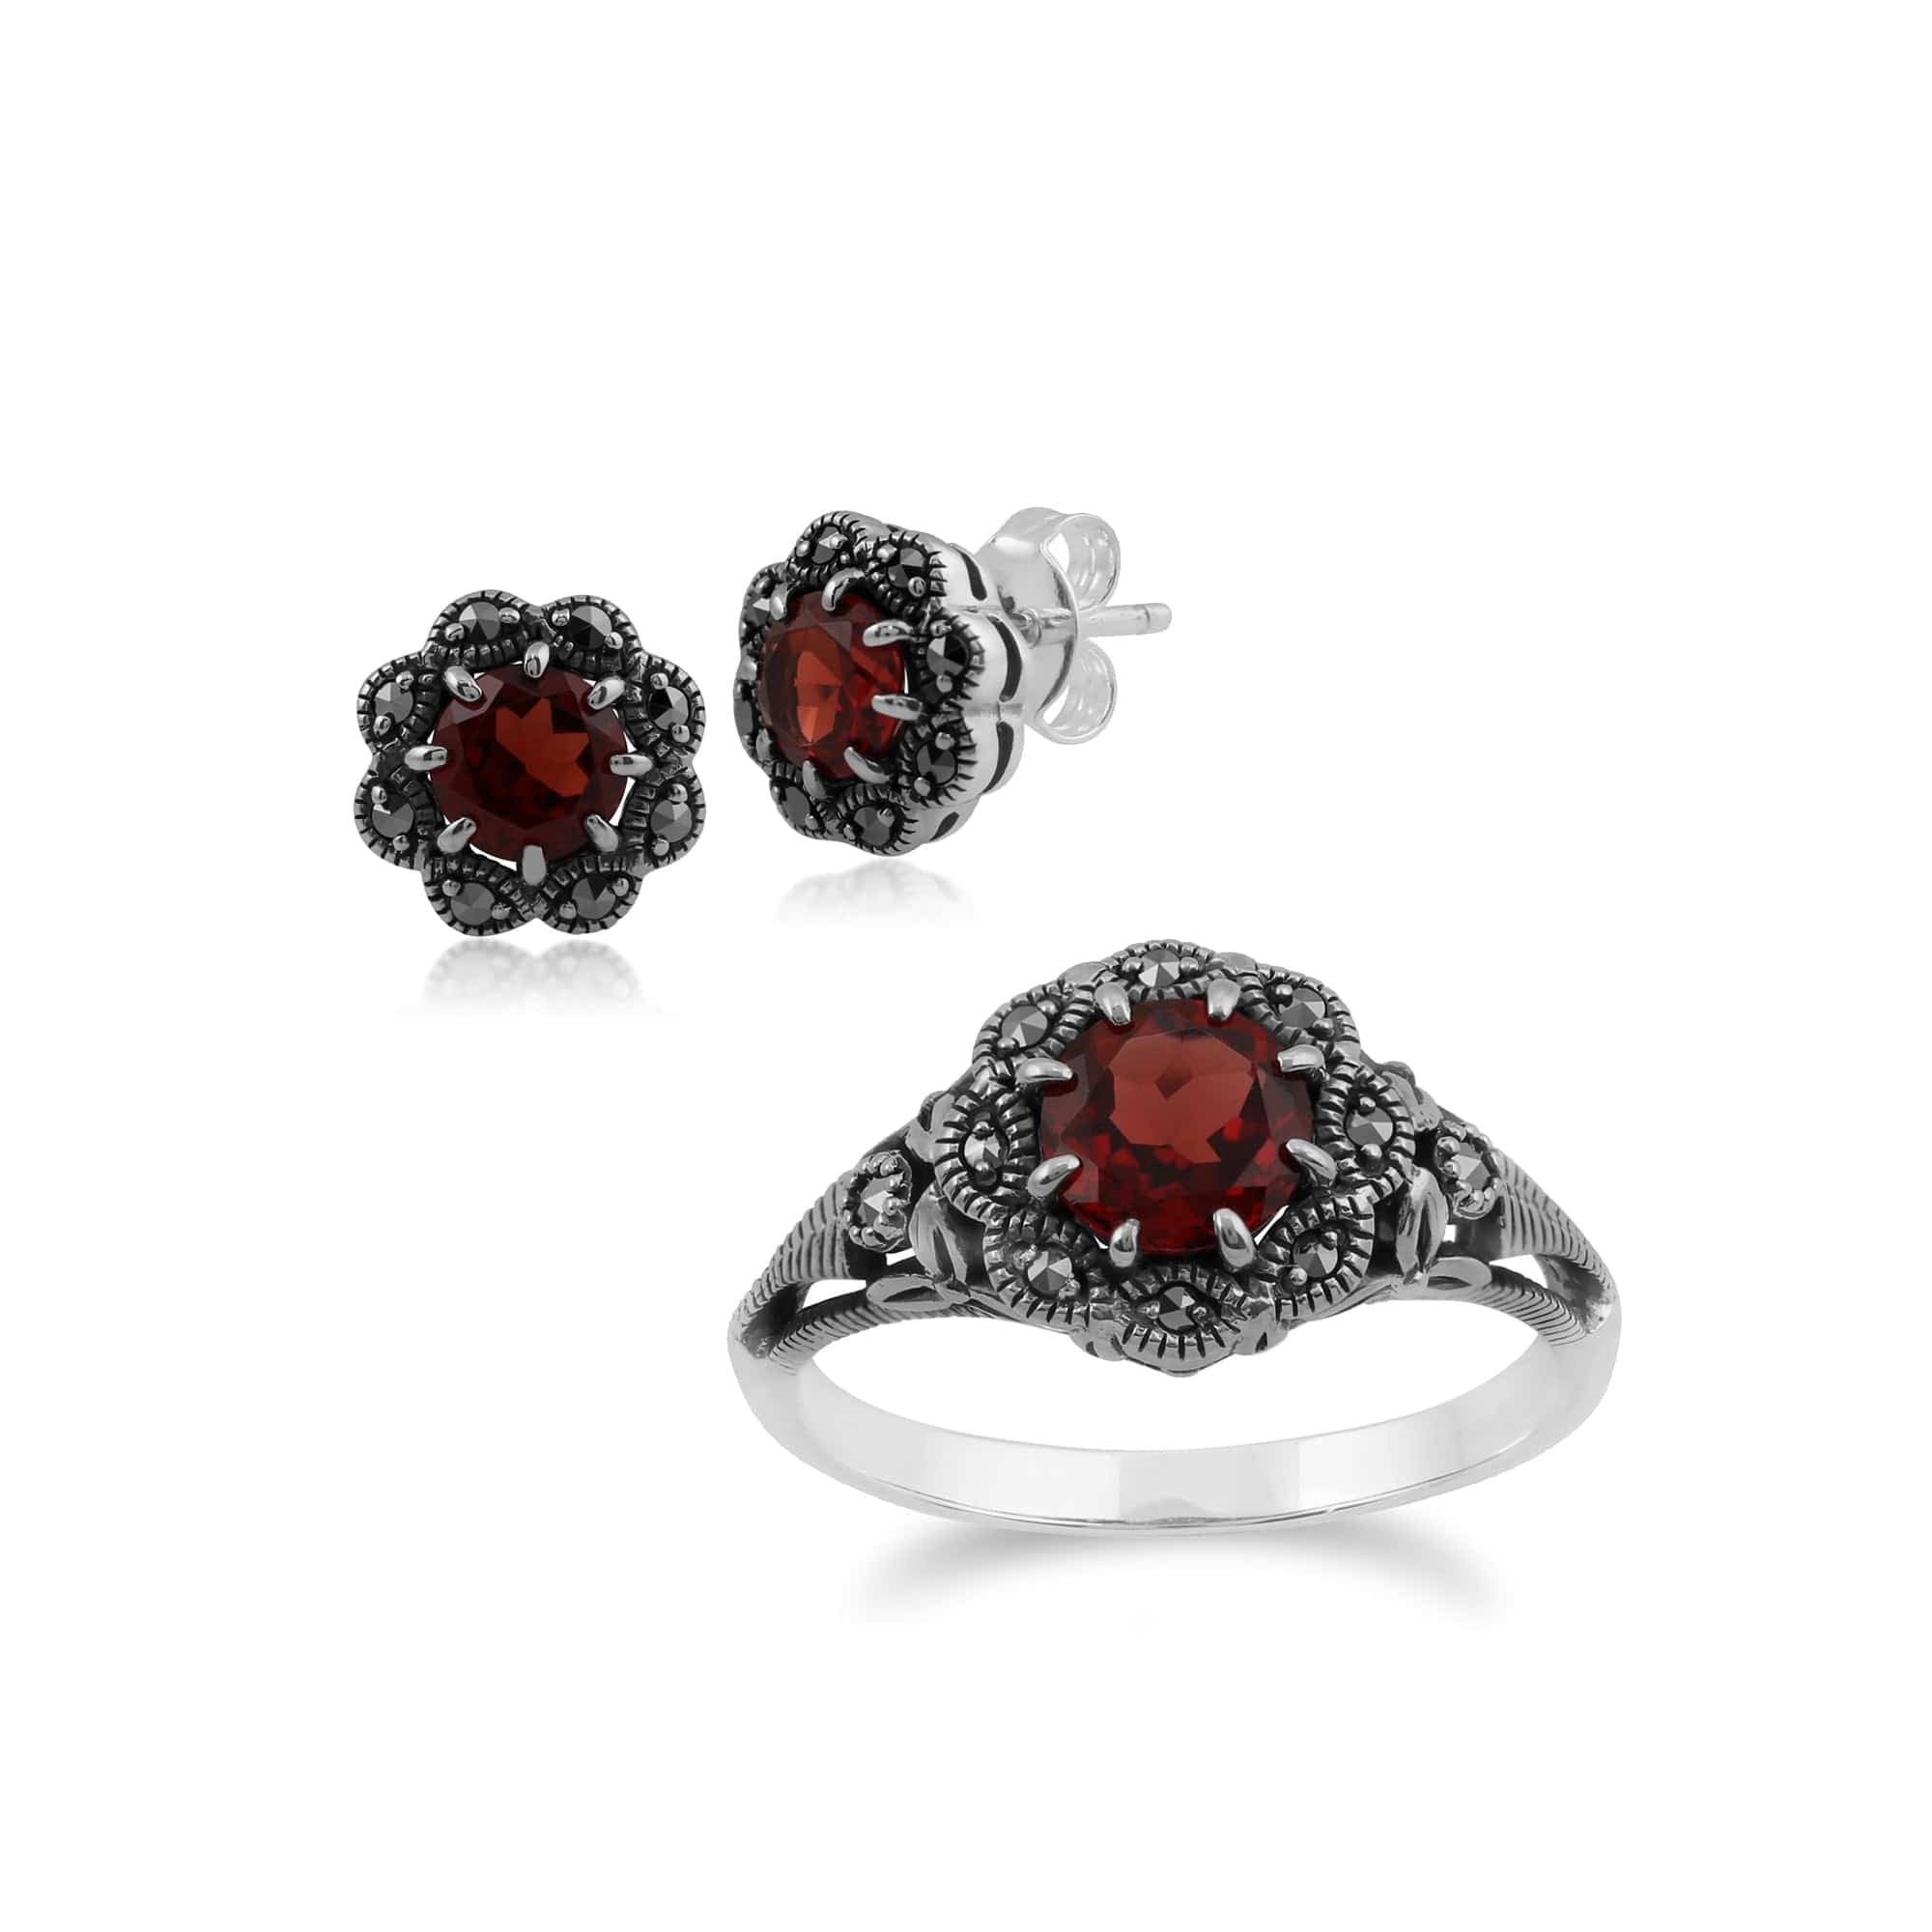 214E731505925-214R524705925 Art Nouveau Style Round Garnet & Marcasite Floral Stud Earrings & Ring Set in 925 Sterling Silver 1